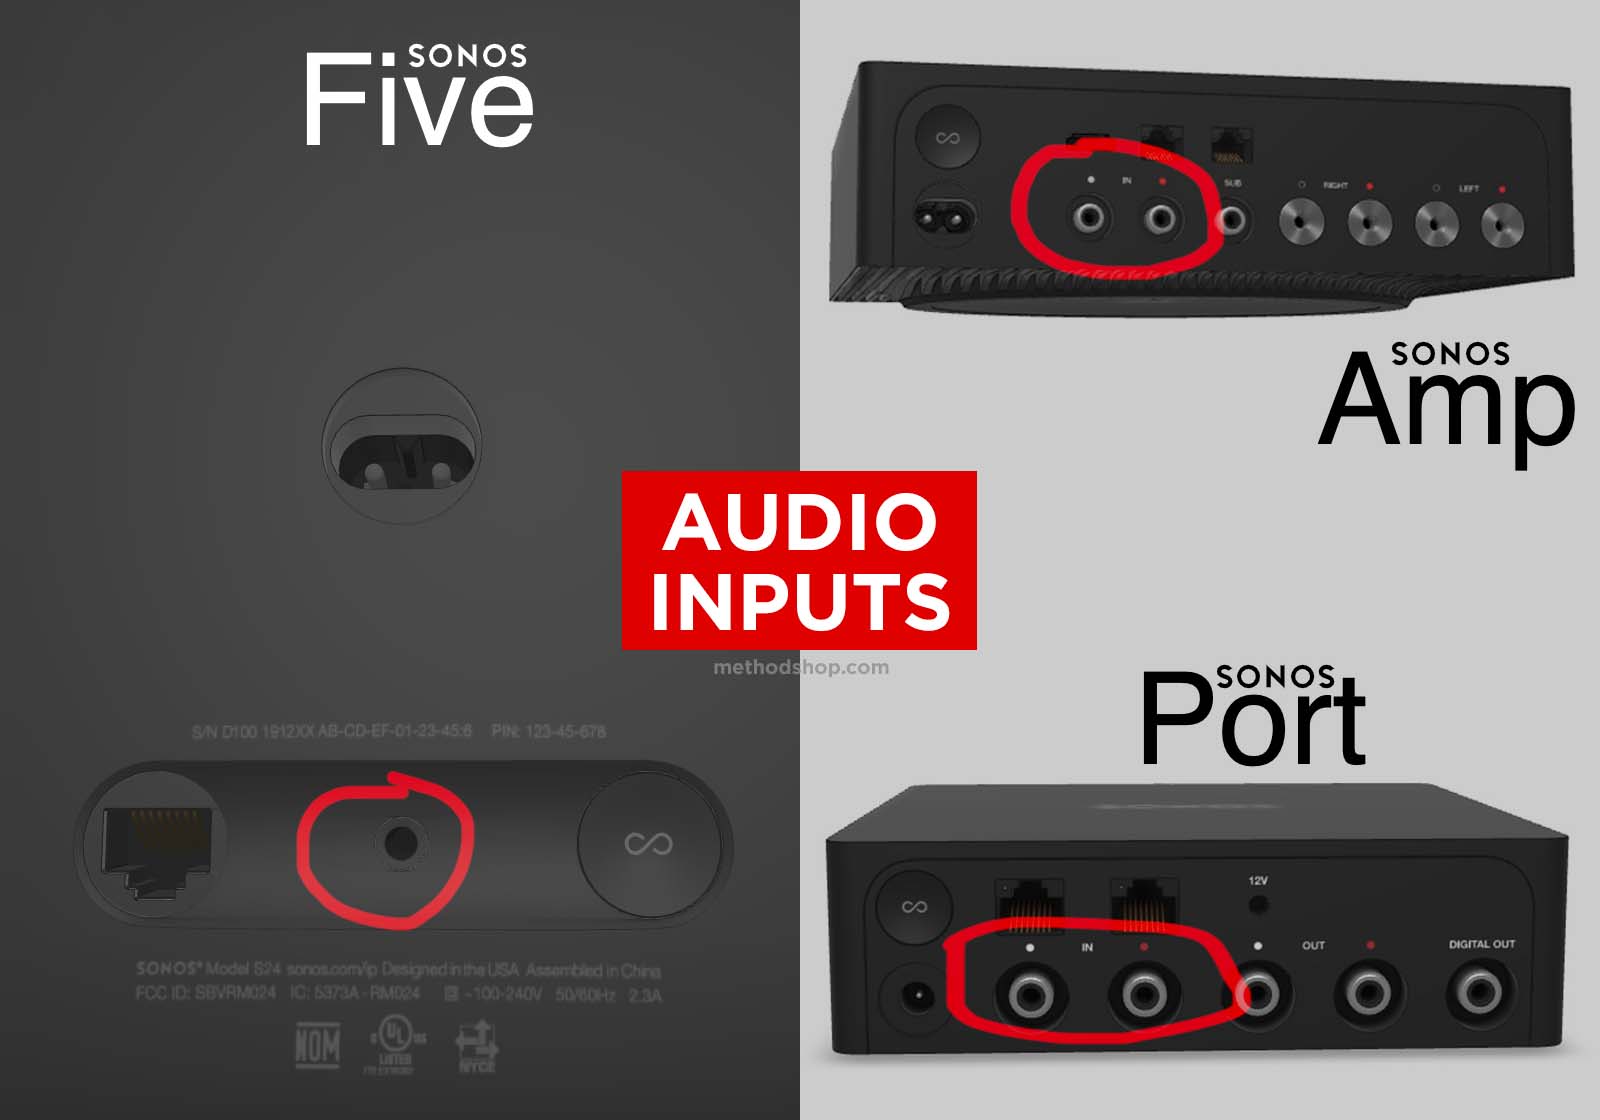 The Audio Inputs For The Sonos Five, Sonos Amp, And Sonos Port. 